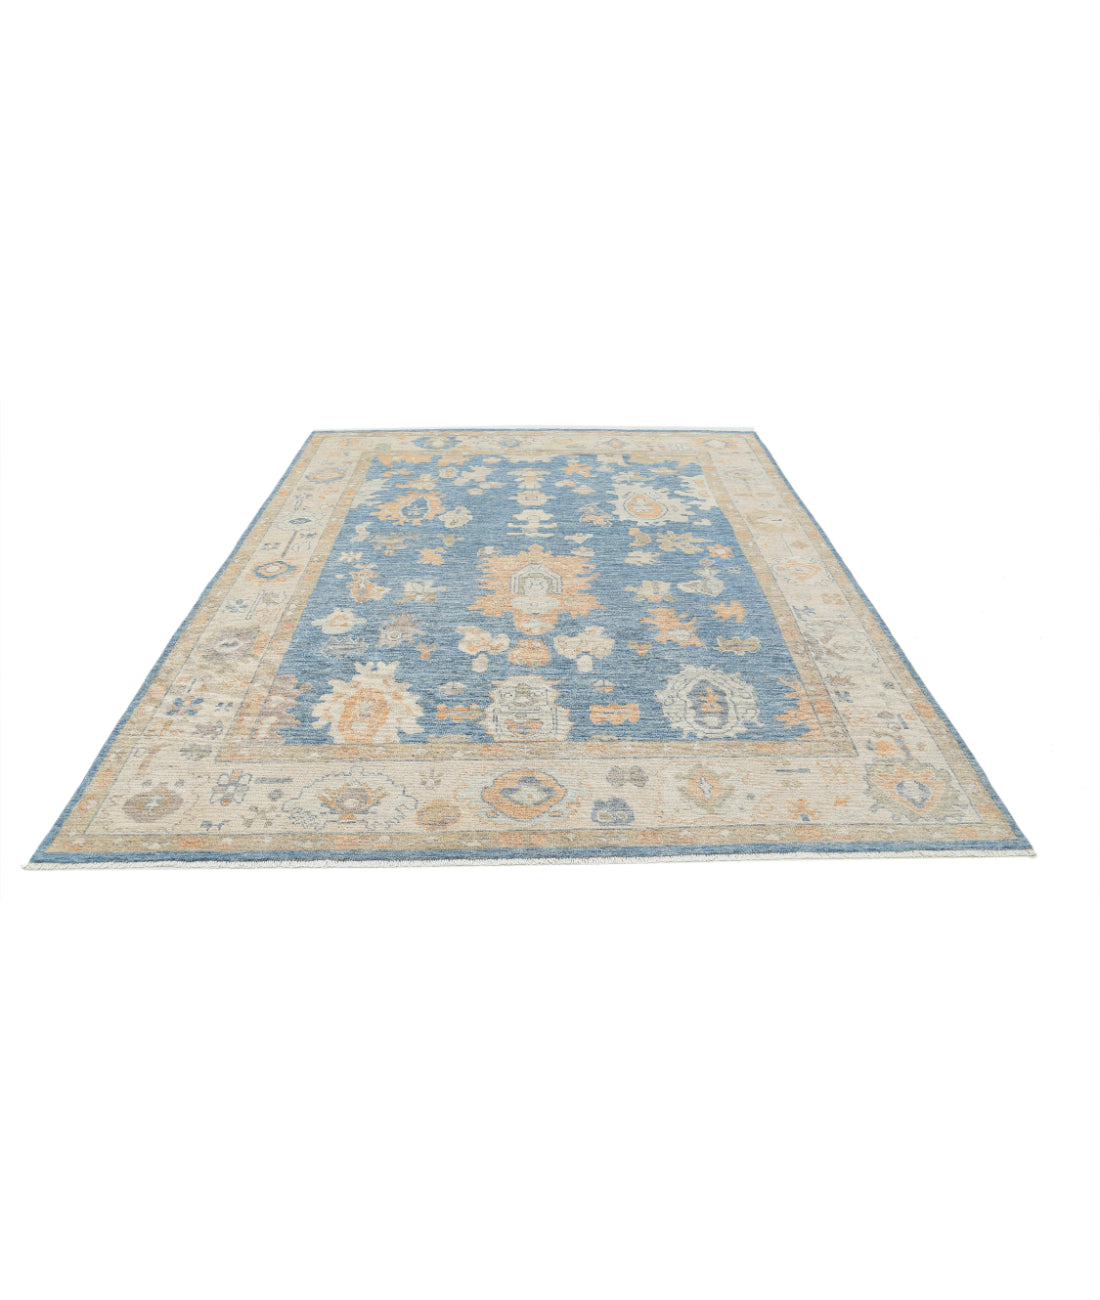 Hand Knotted Oushak Wool Rug - 7'11'' x 9'10'' 7'11'' x 9'10'' (238 X 295) / Blue / Ivory